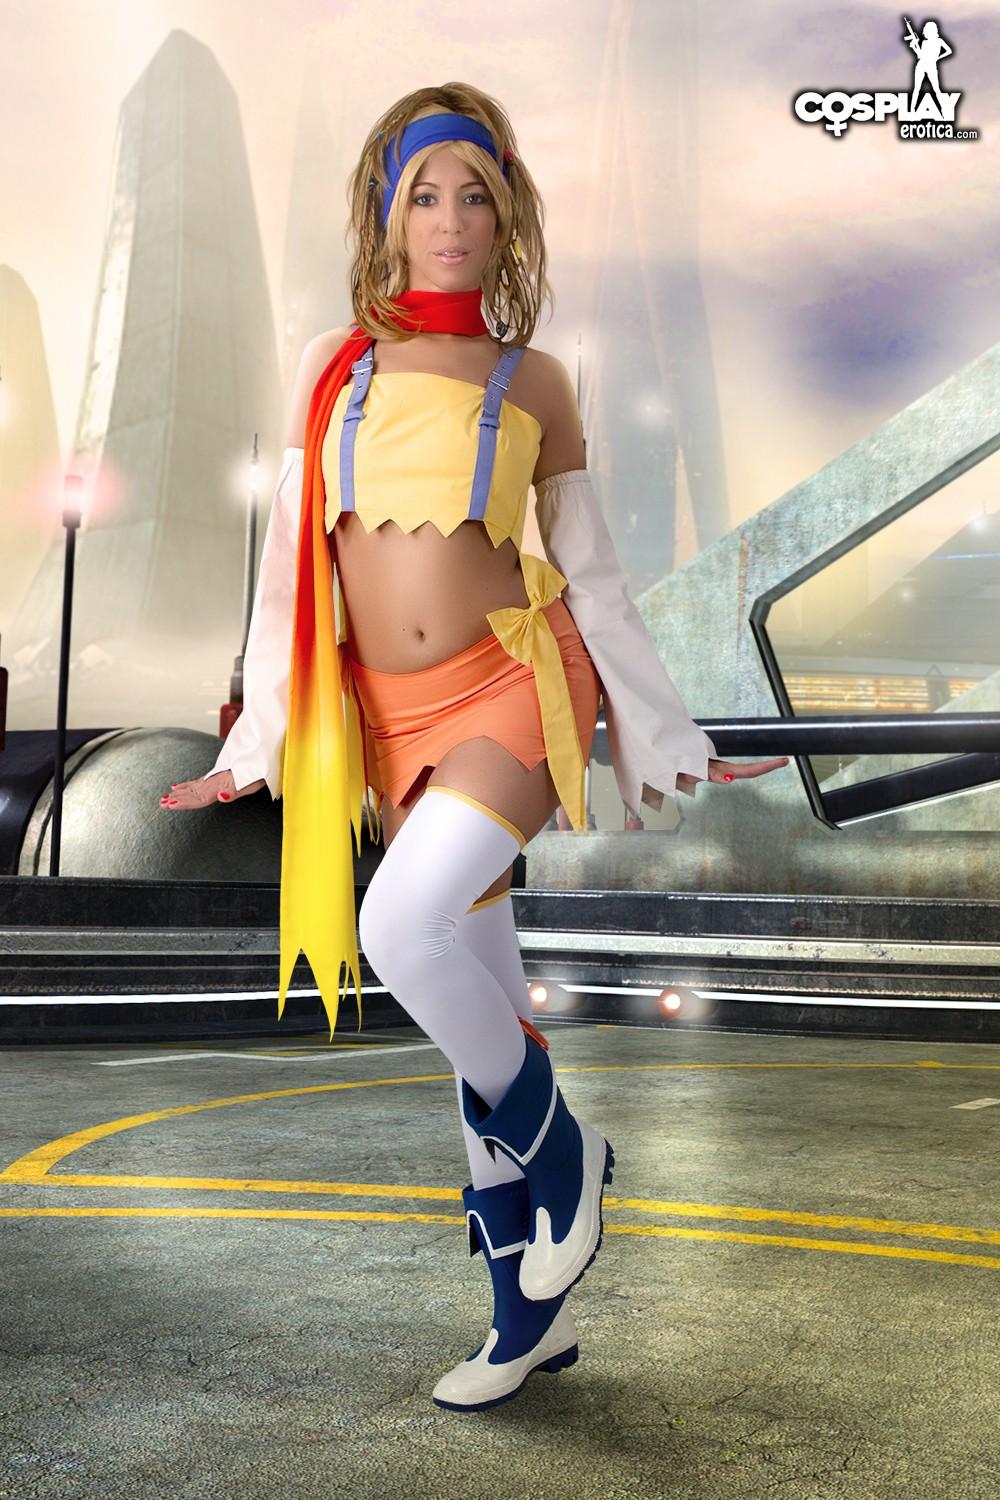 Cosplay babe Shelly dresses up as a very sexy Rikku #59967464